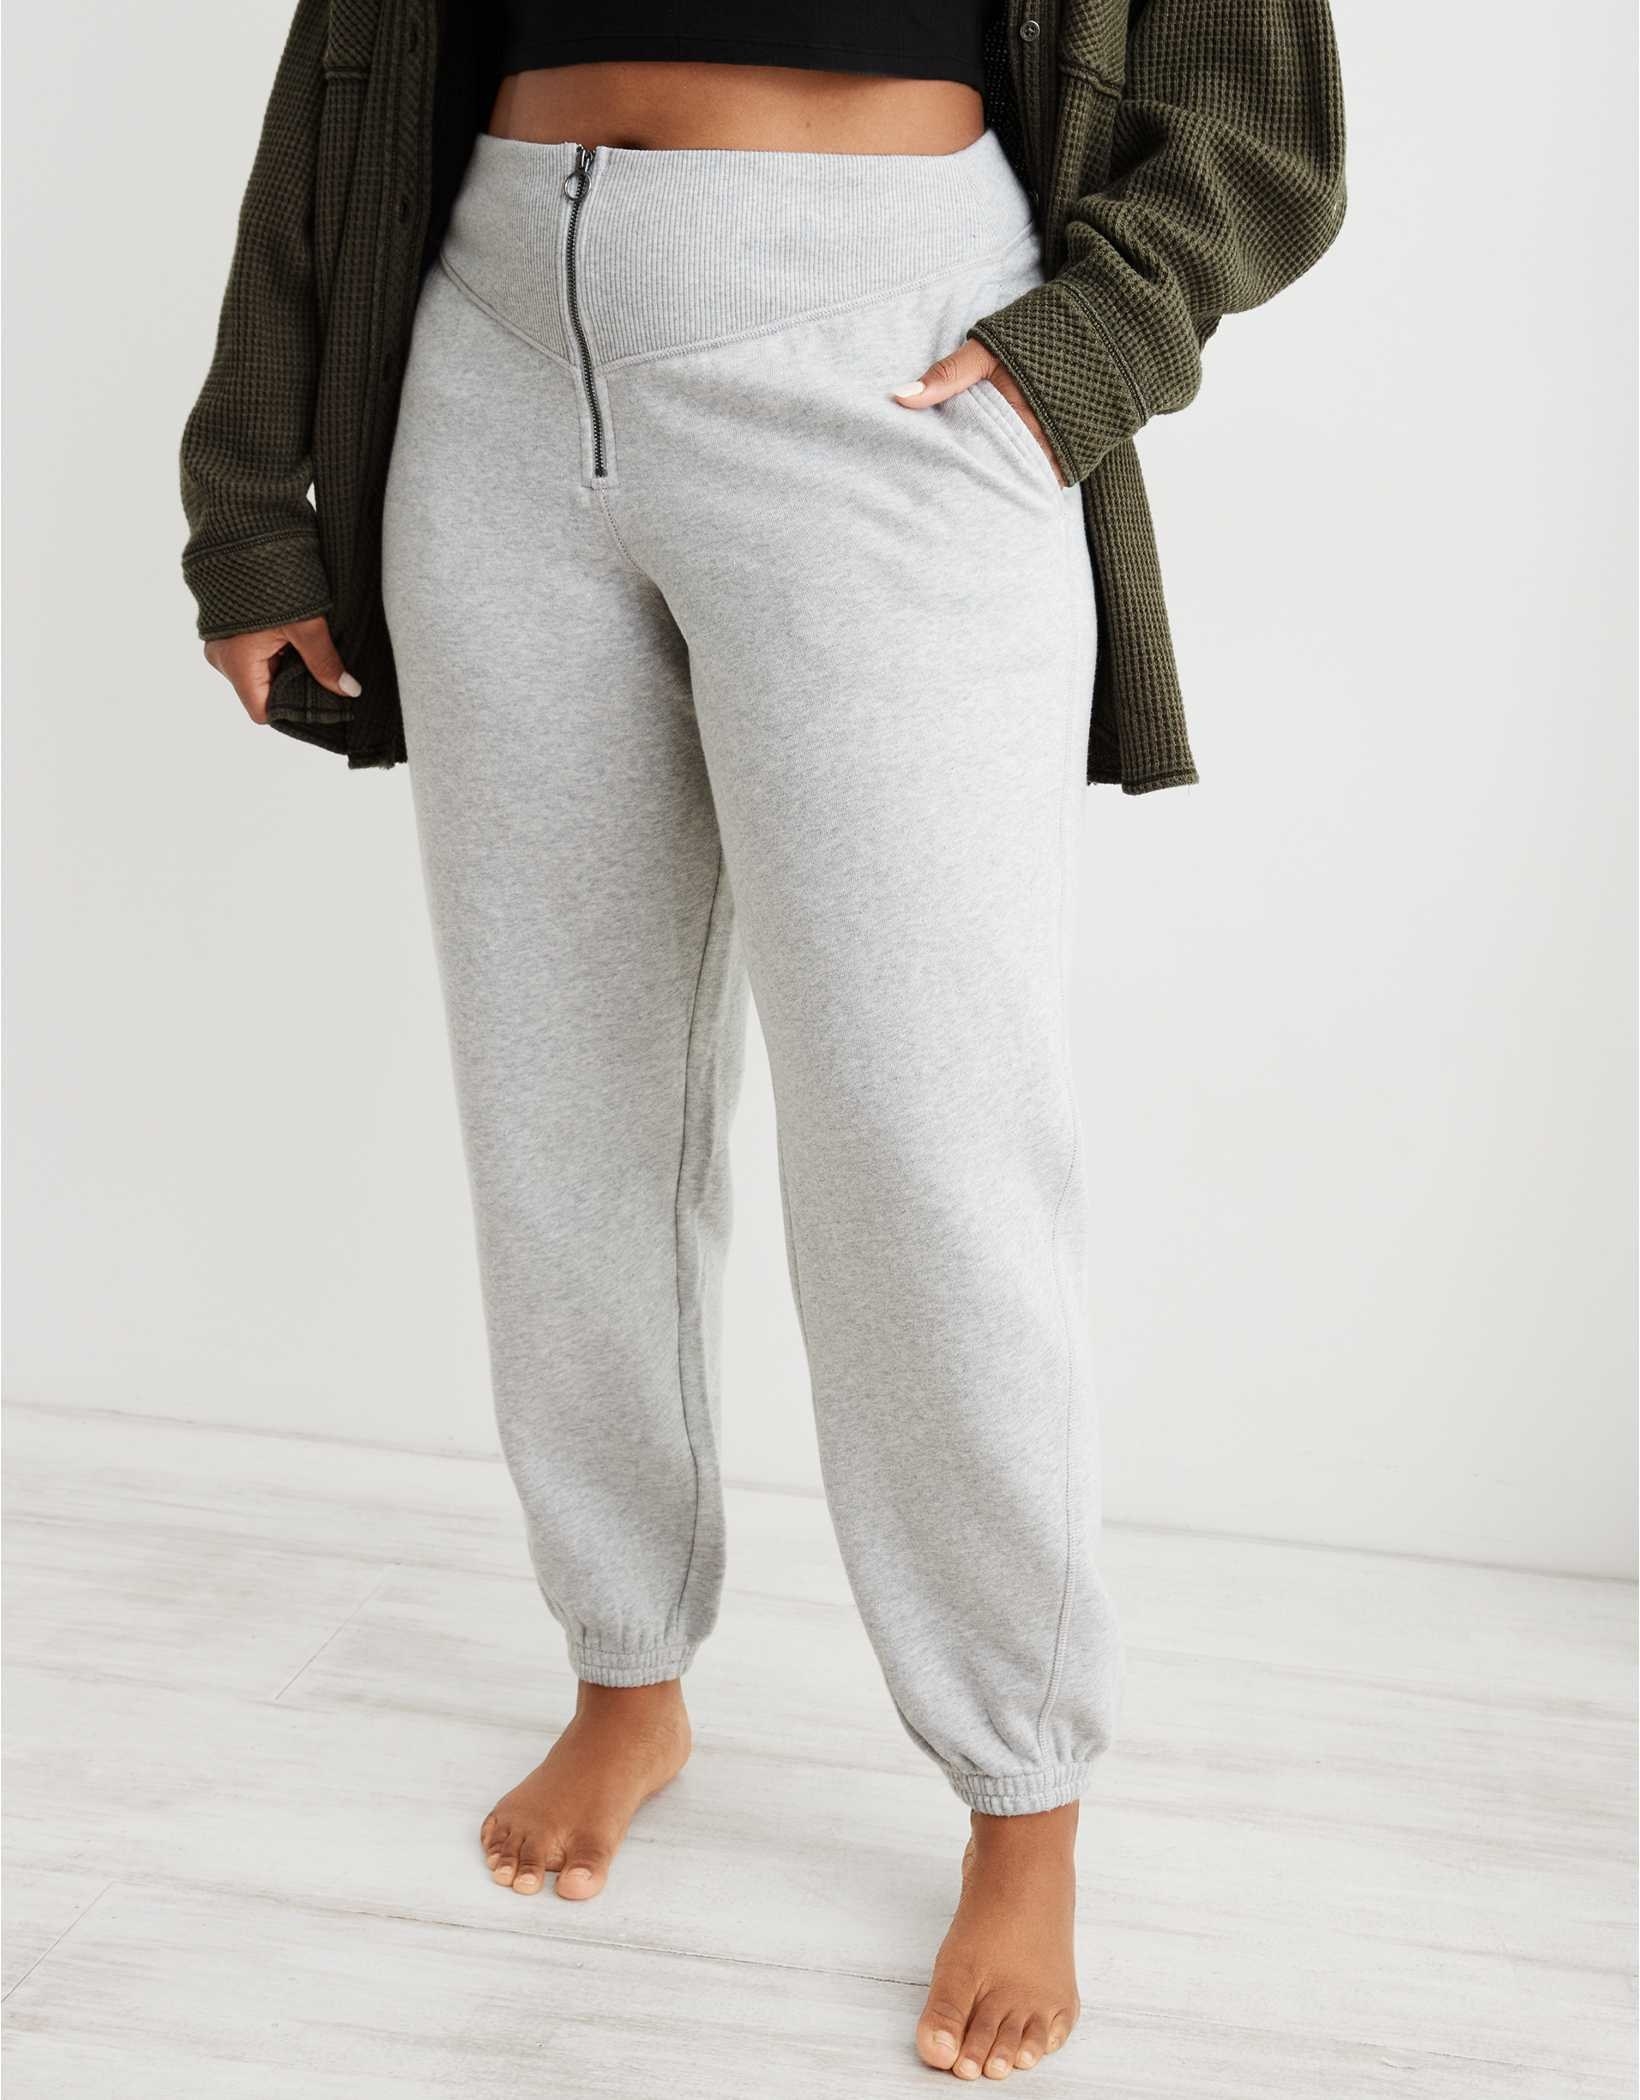 model in light grey joggers with a zipper closure